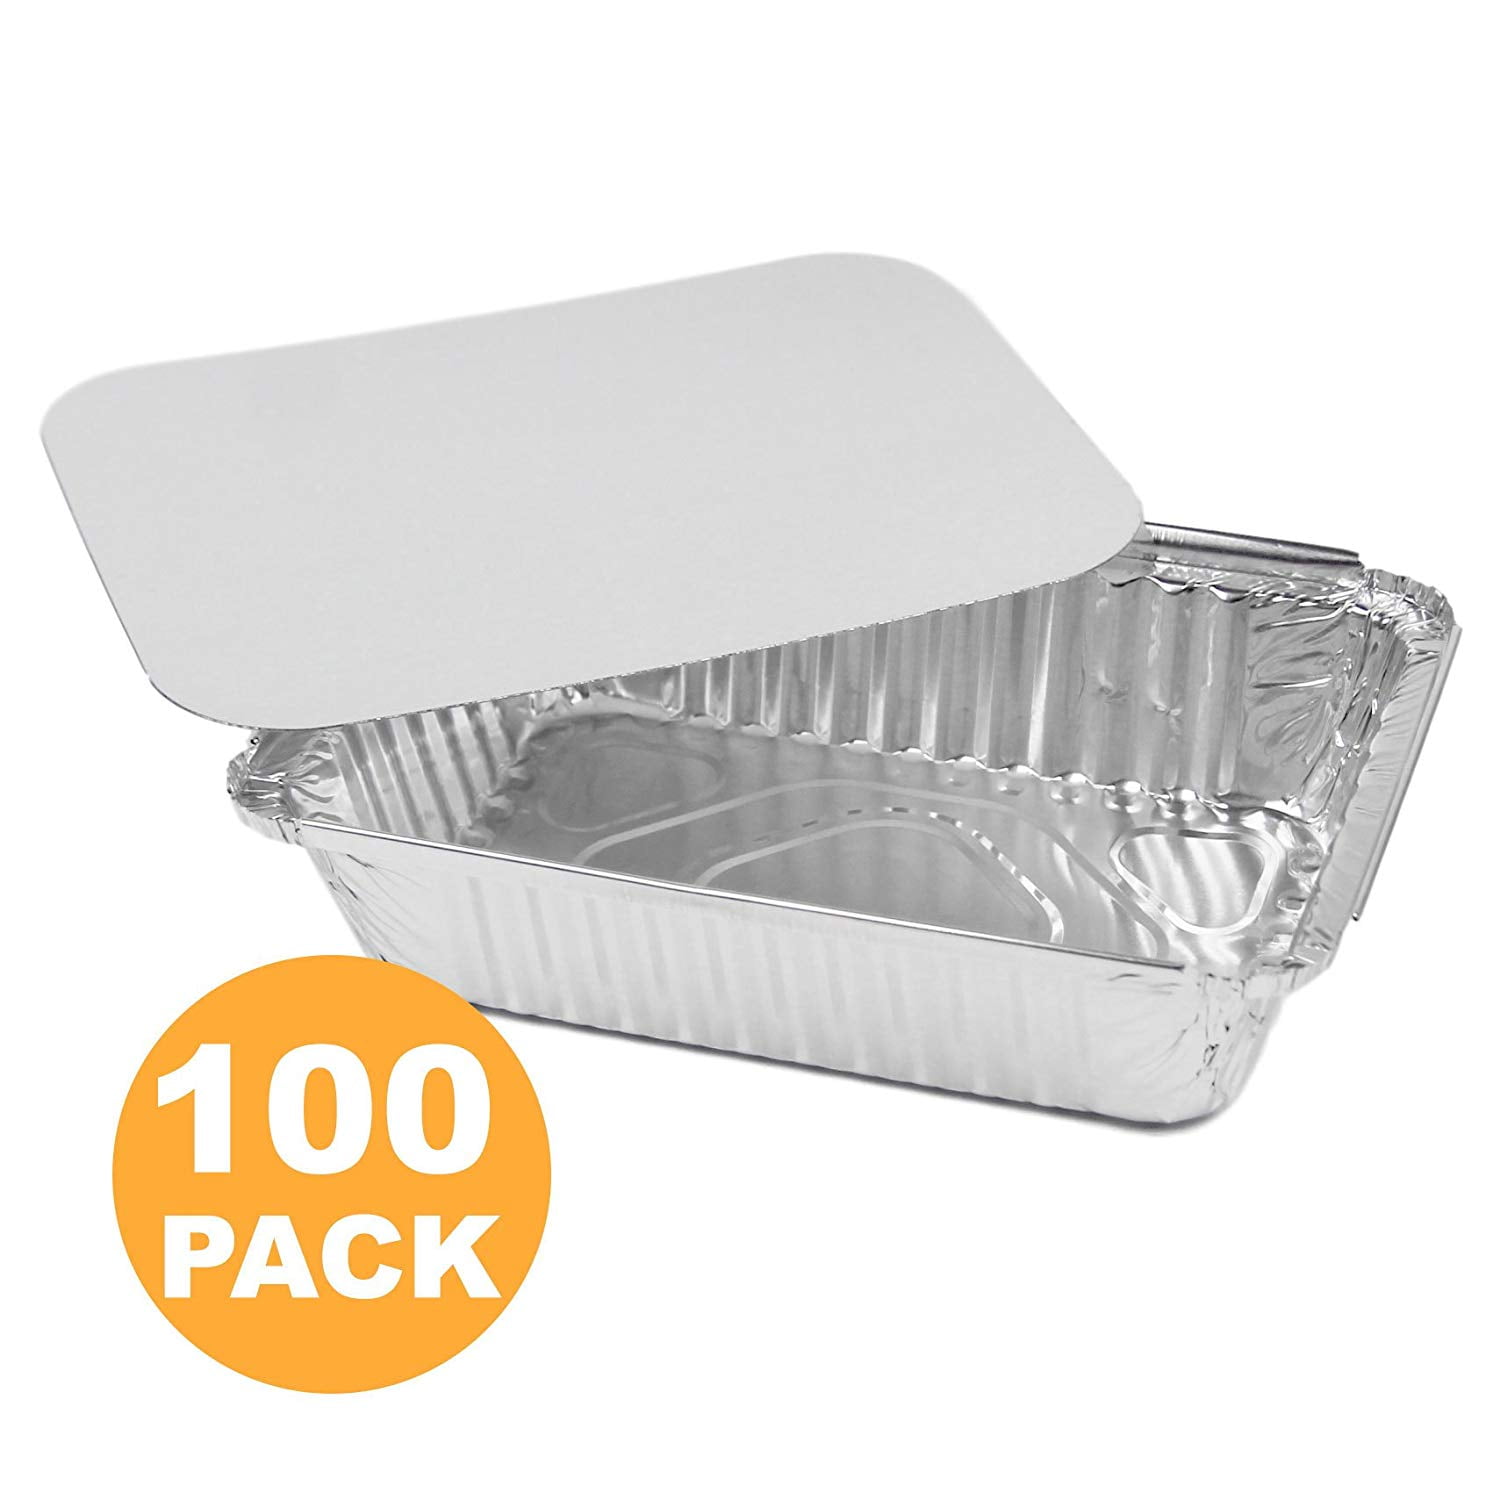 Oblong Disposable Cookware Aluminum Foil Pan 1 Lb Capacity Container Pans With 